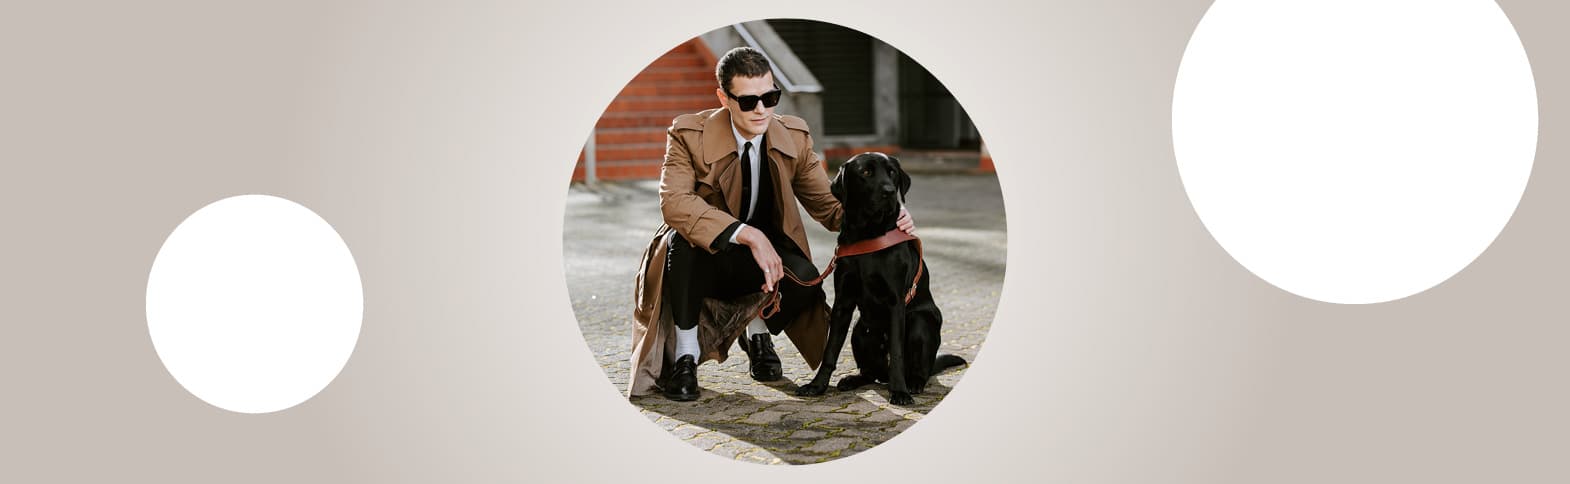 On a grey background is a circular image of Michael crouched with his black Labrador retriever guide dog, Taine.